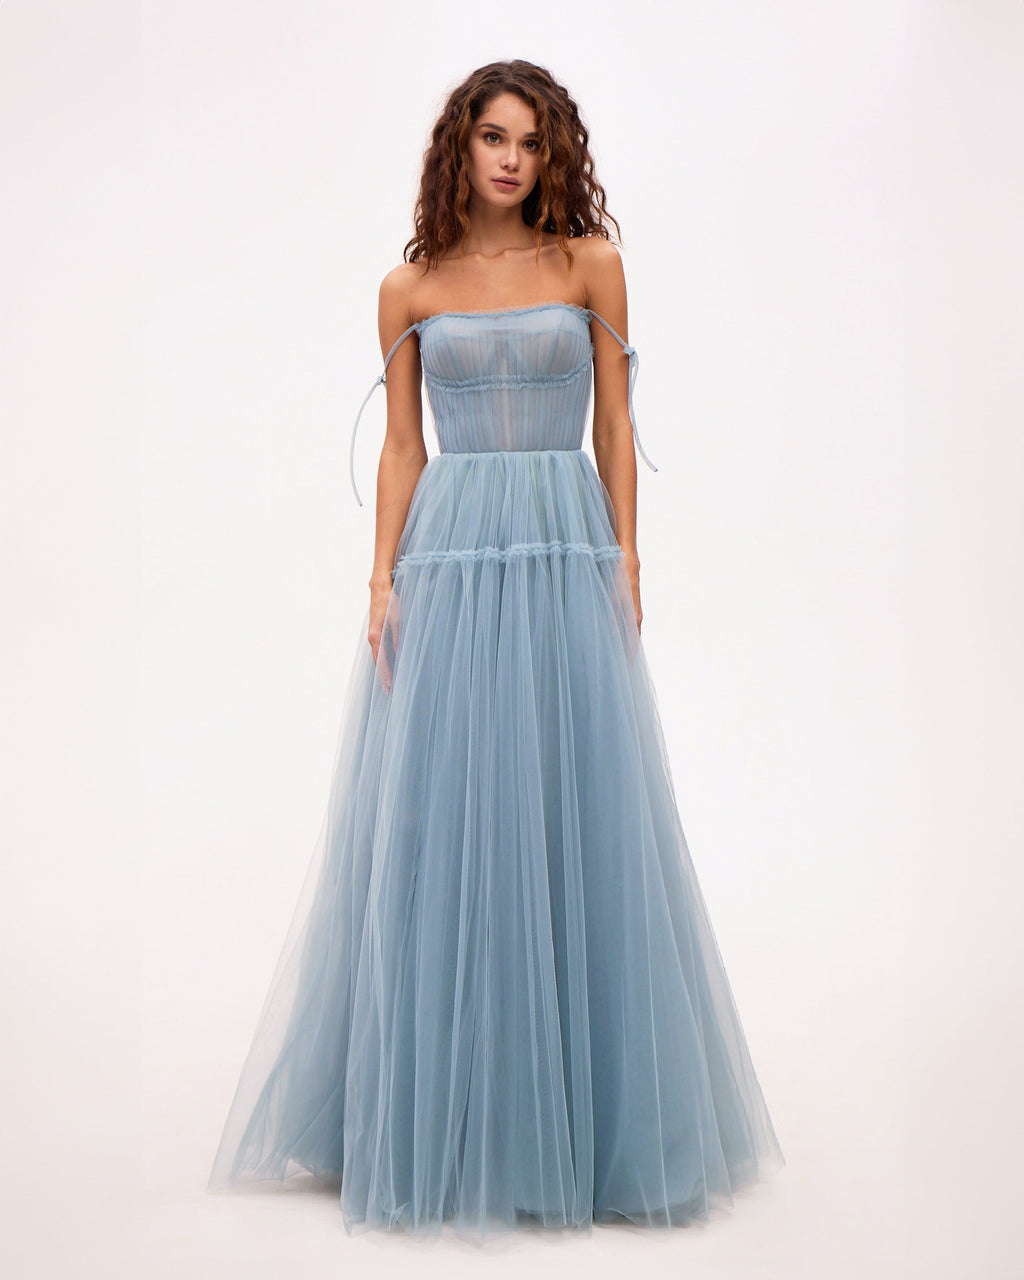 Tulle Dress Gown